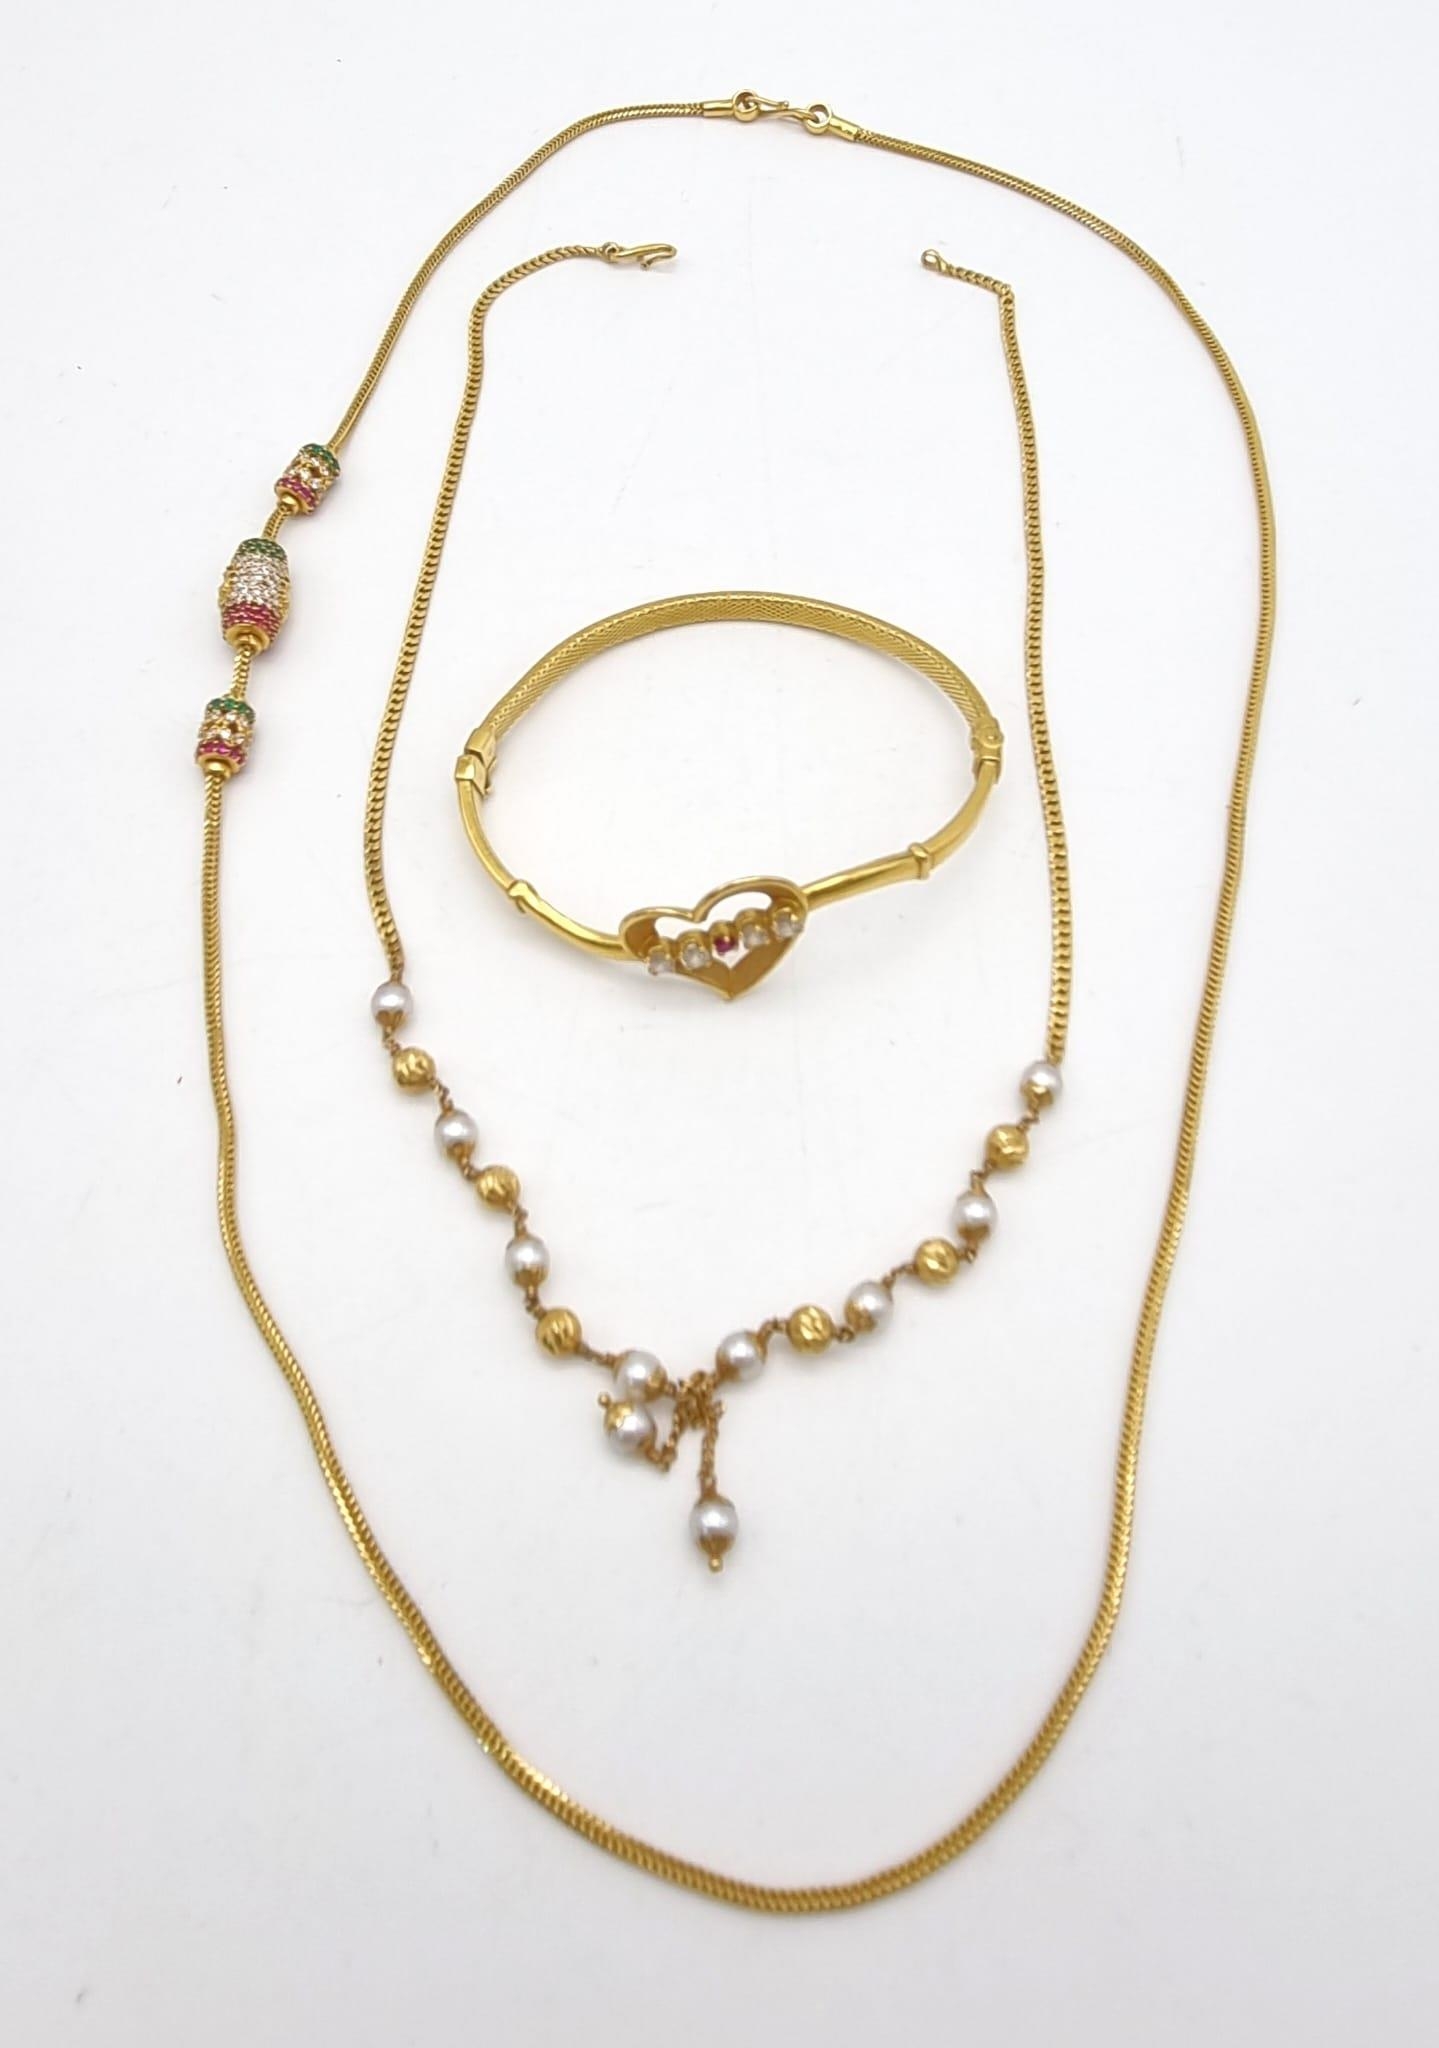 A 22K Gold Bangle and Two 18K Gold Necklaces. Both necklaces with stone decoration and small kinks